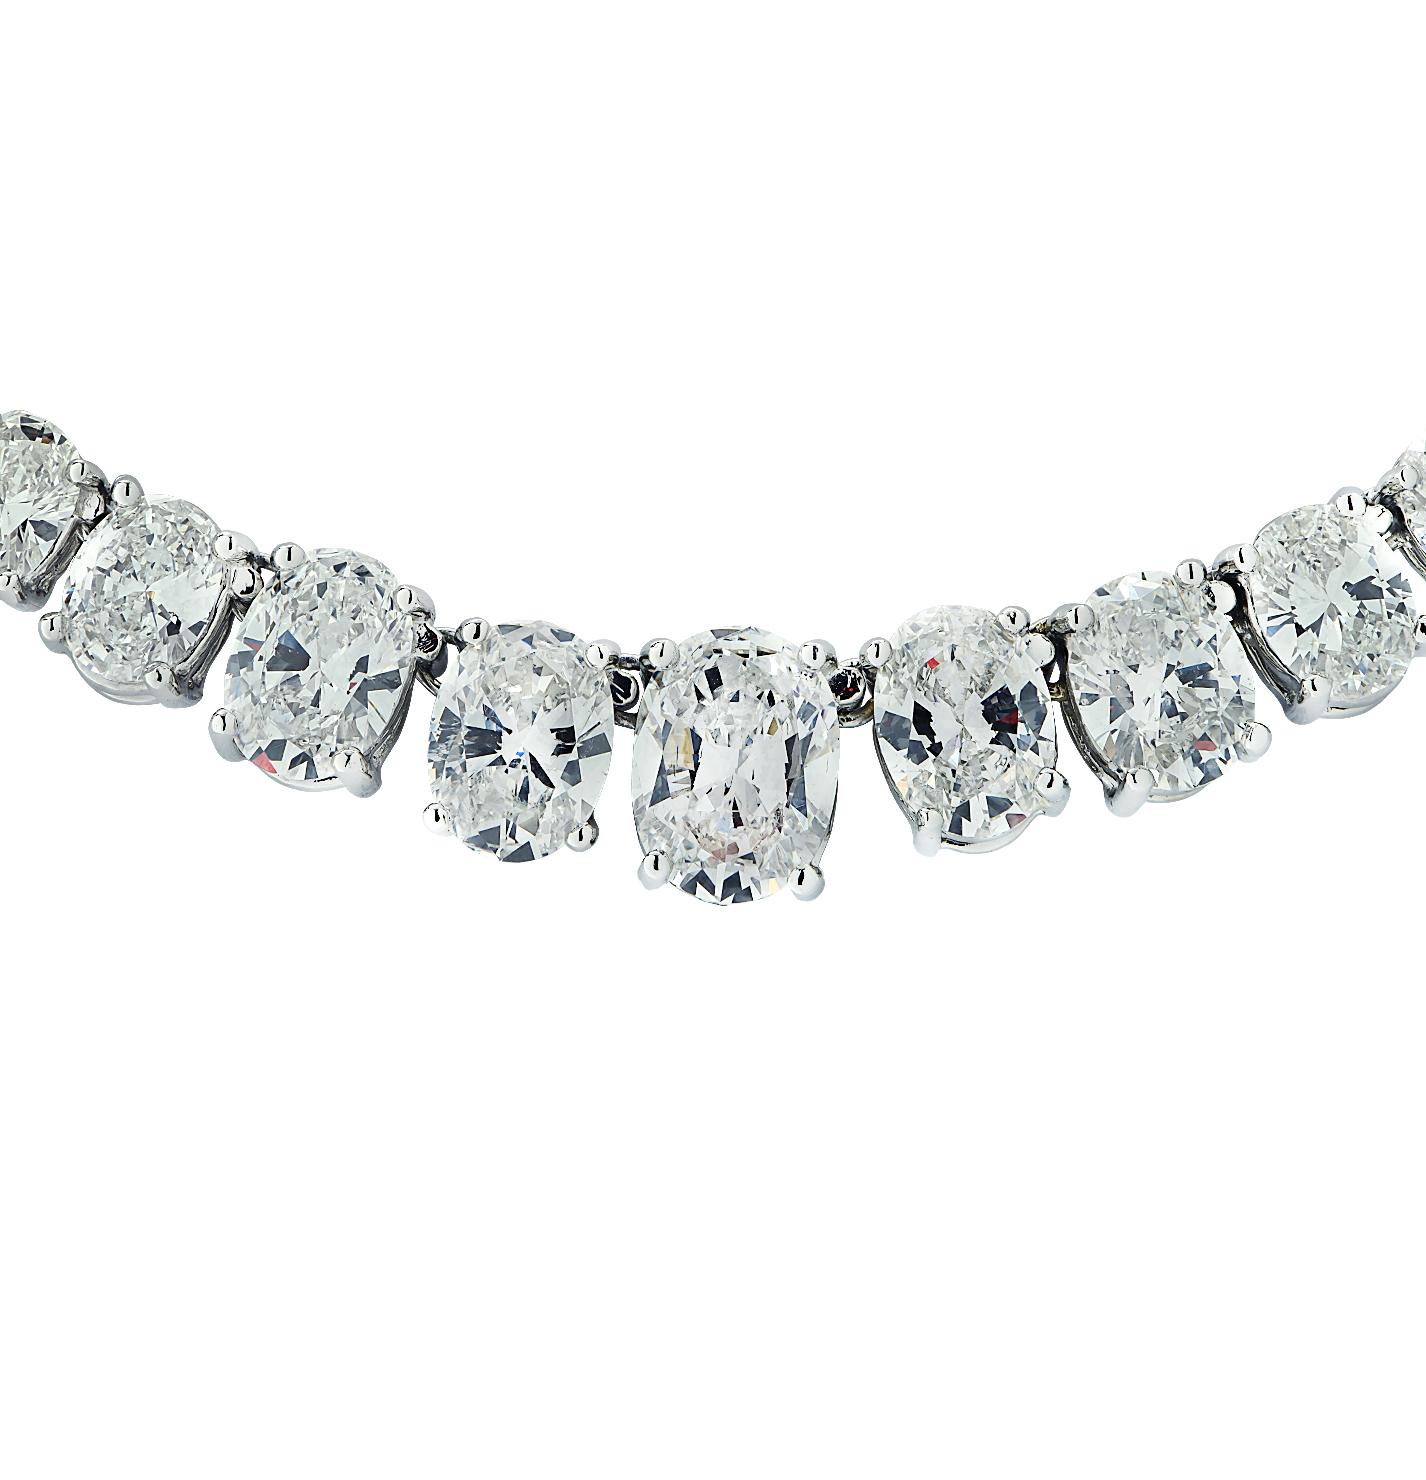 Exquisite Oval Diamond Riviere Necklace crafted in Platinum showcasing 85 sensational Oval Cut diamonds weighing 45 carats total, E-F-G color, VS-SI clarity. The middle 8 diamonds are certified by the GIA. Each diamond was carefully selected,